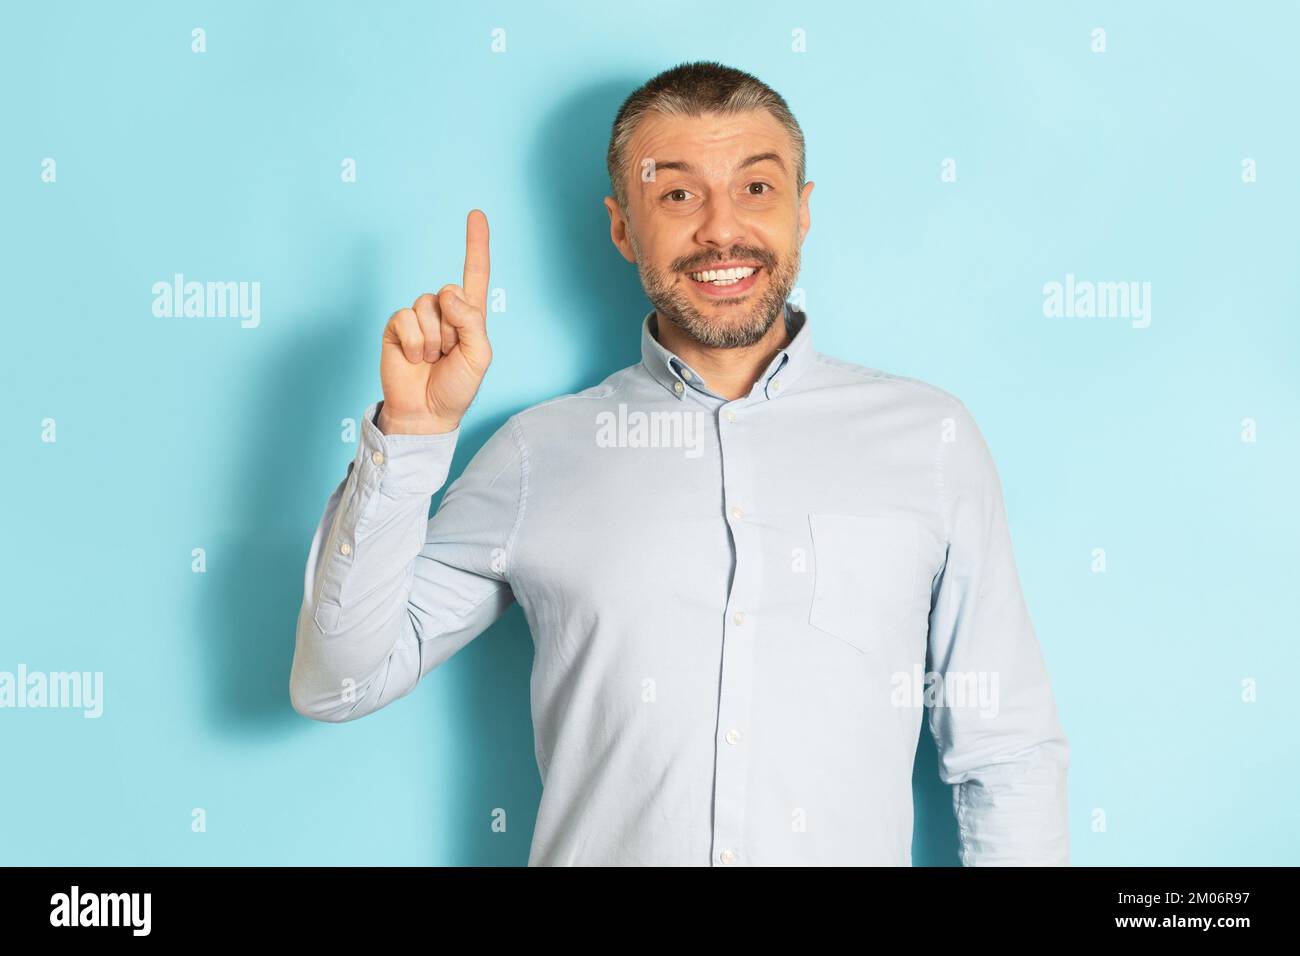 Eureka, gestures concept. Excited mature caucasian man pointing index finger up and smiling over blue studio background Stock Photo